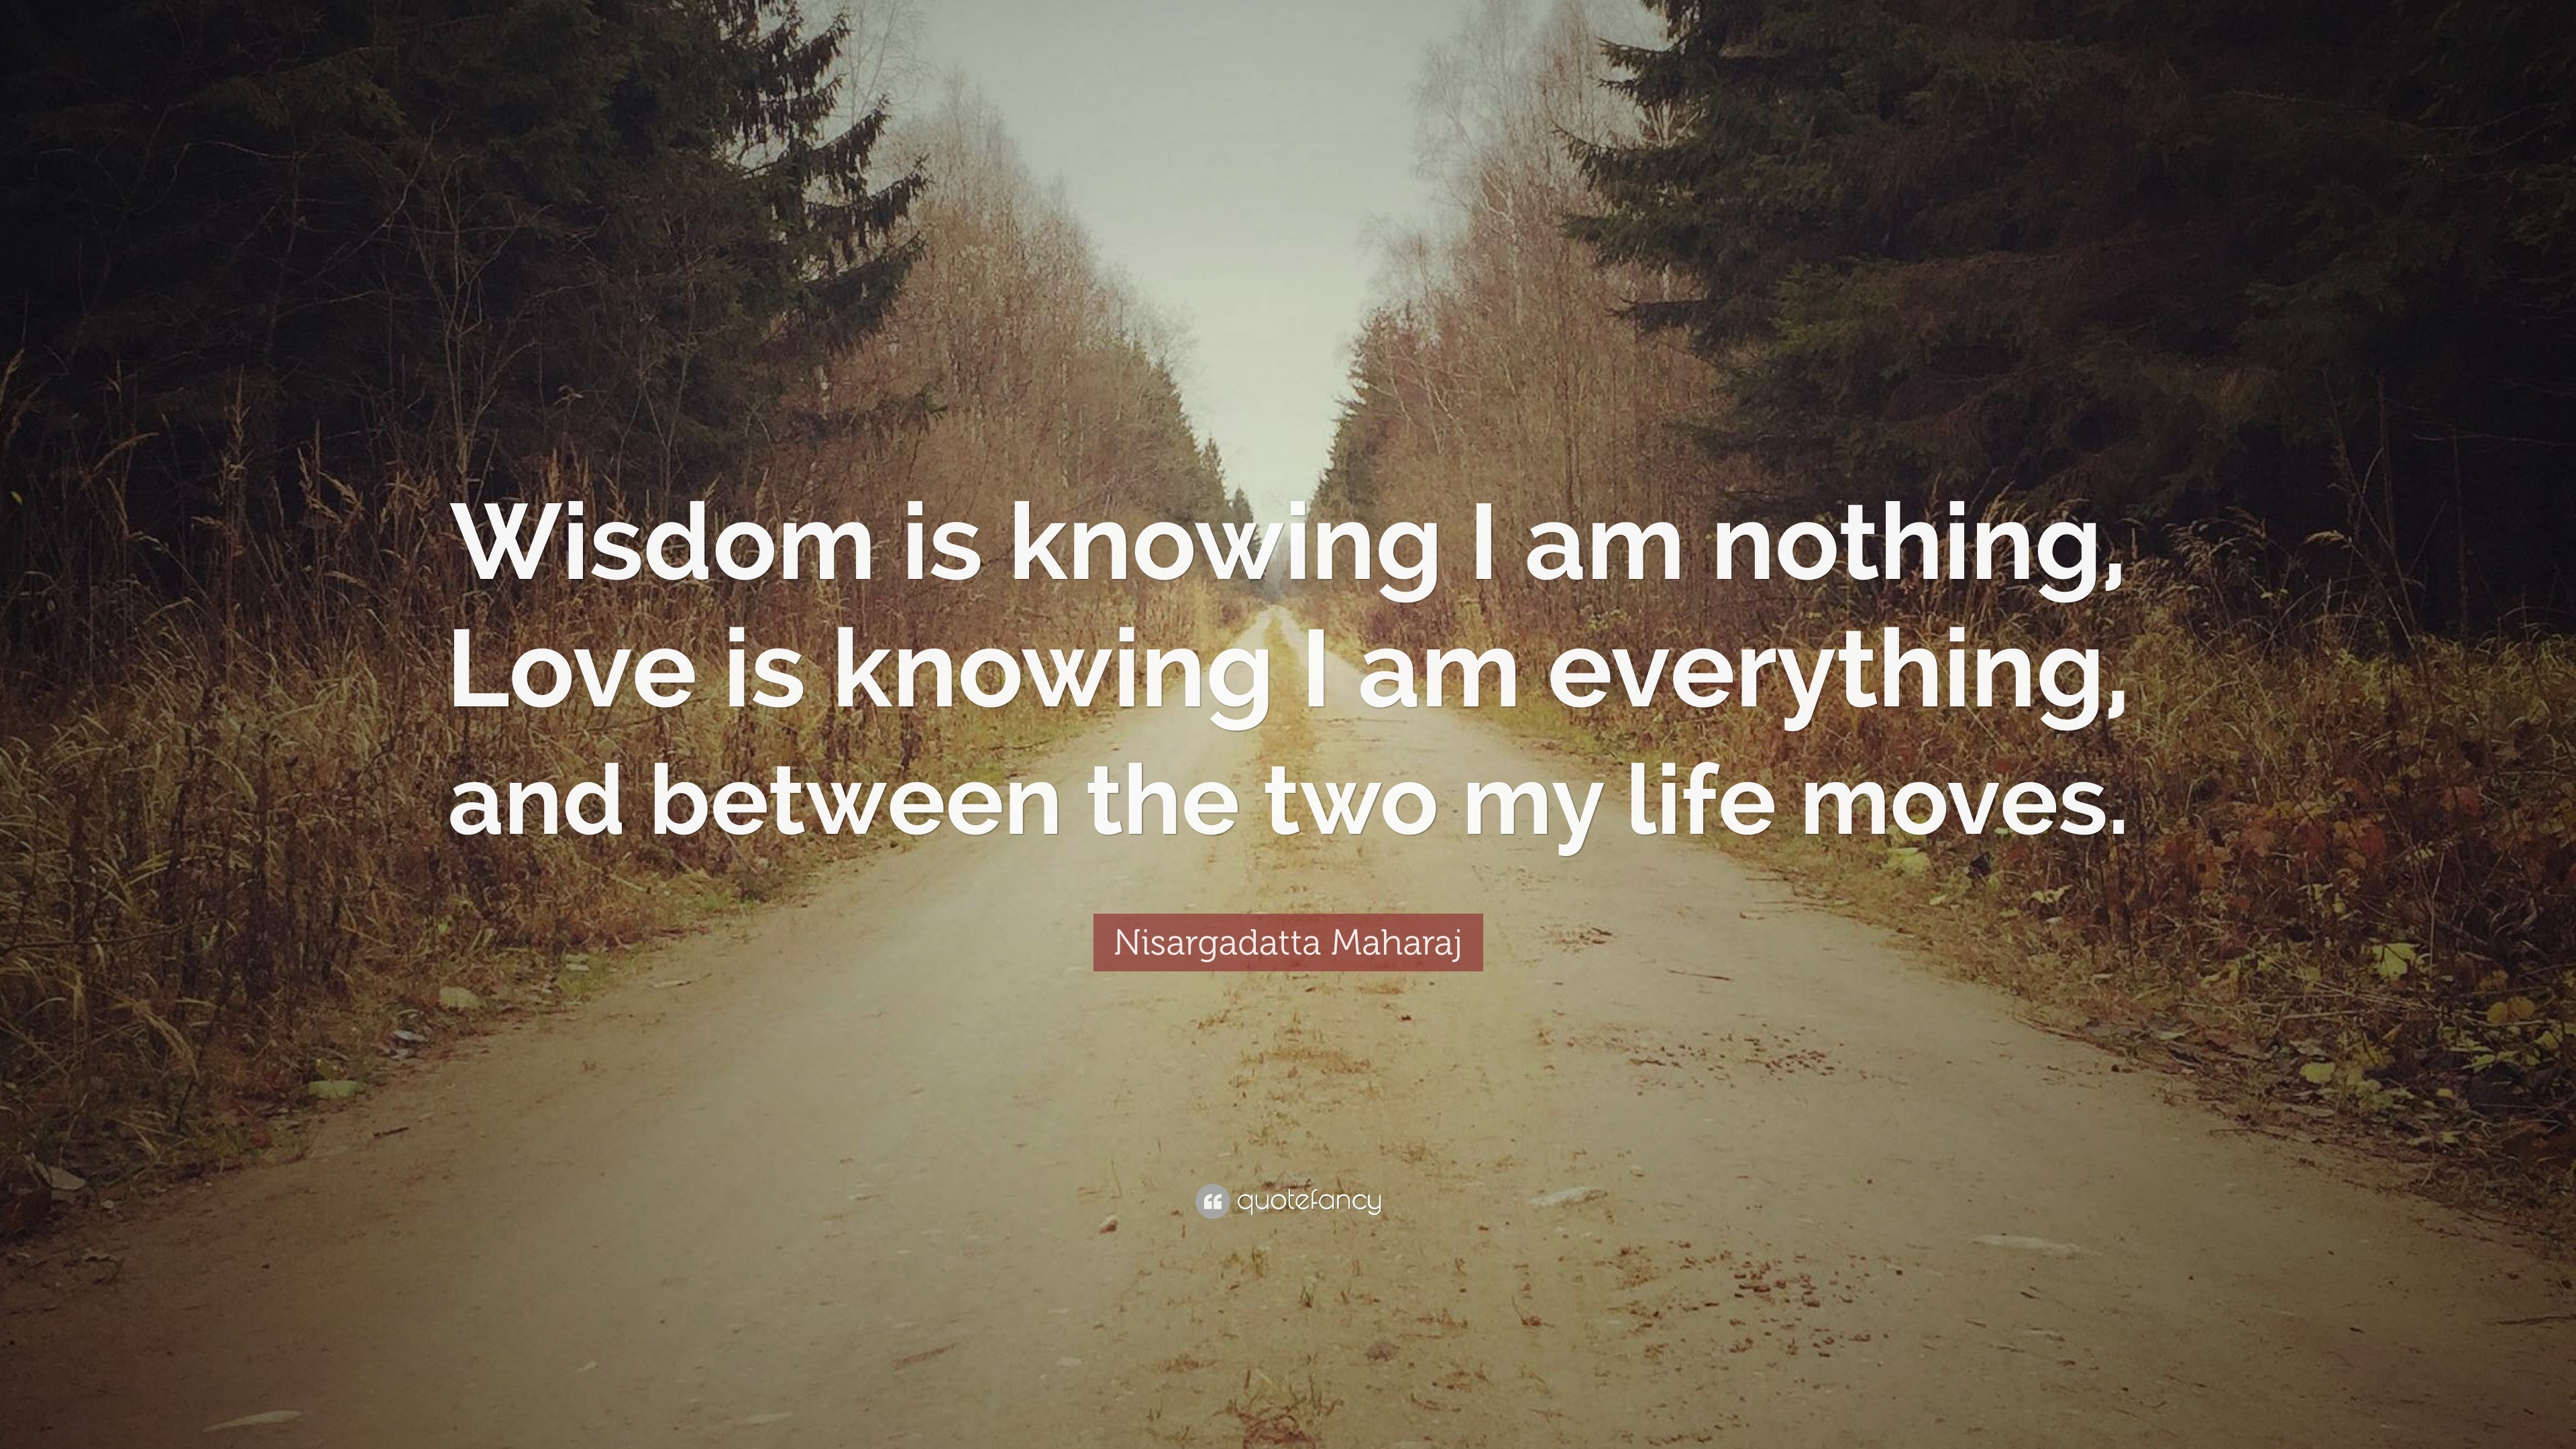 Nisargadatta Maharaj Quote “Wisdom is knowing I am nothing Love is knowing I